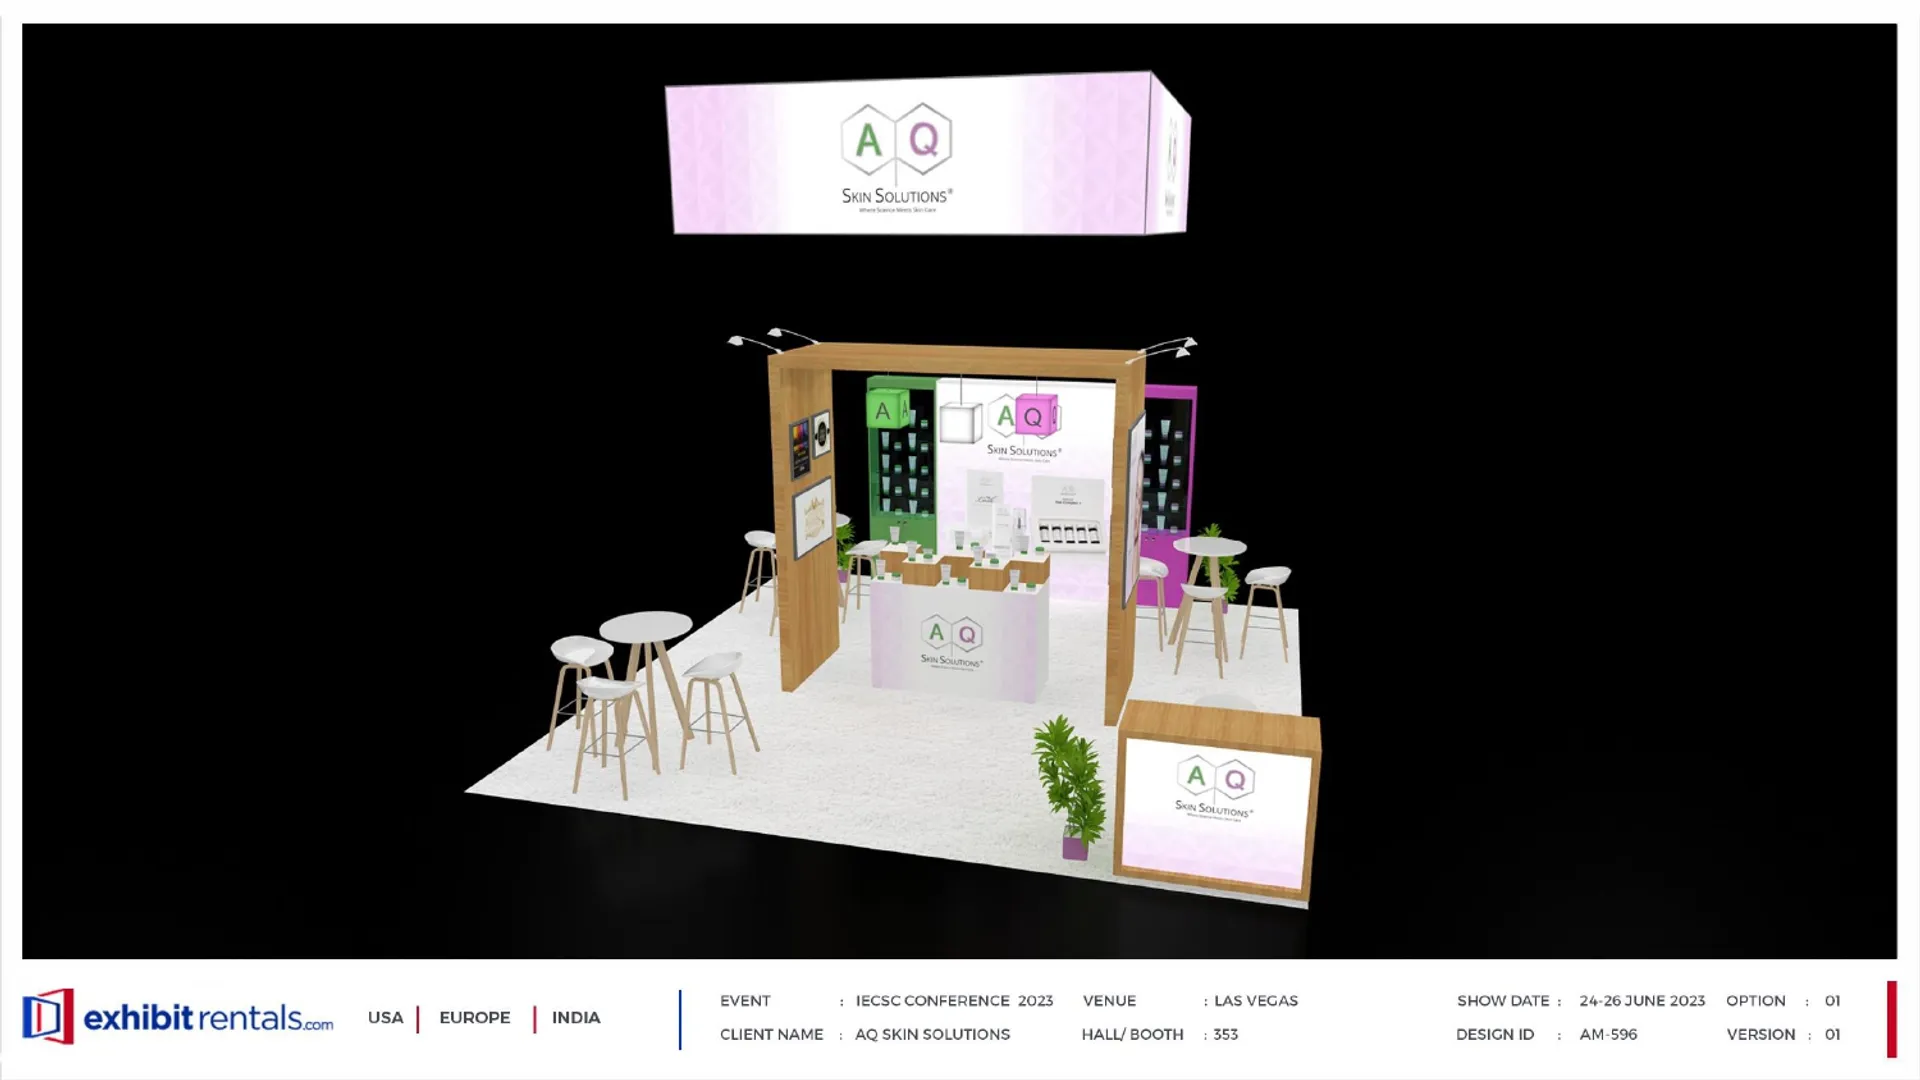 booth-design-projects/Exhibit-Rentals/2024-04-18-20x20-ISLAND-Project-85/1.1_AQ Skin Solutions_IECSC Conference_ER design proposal -25_page-0001-t1ocp.jpg